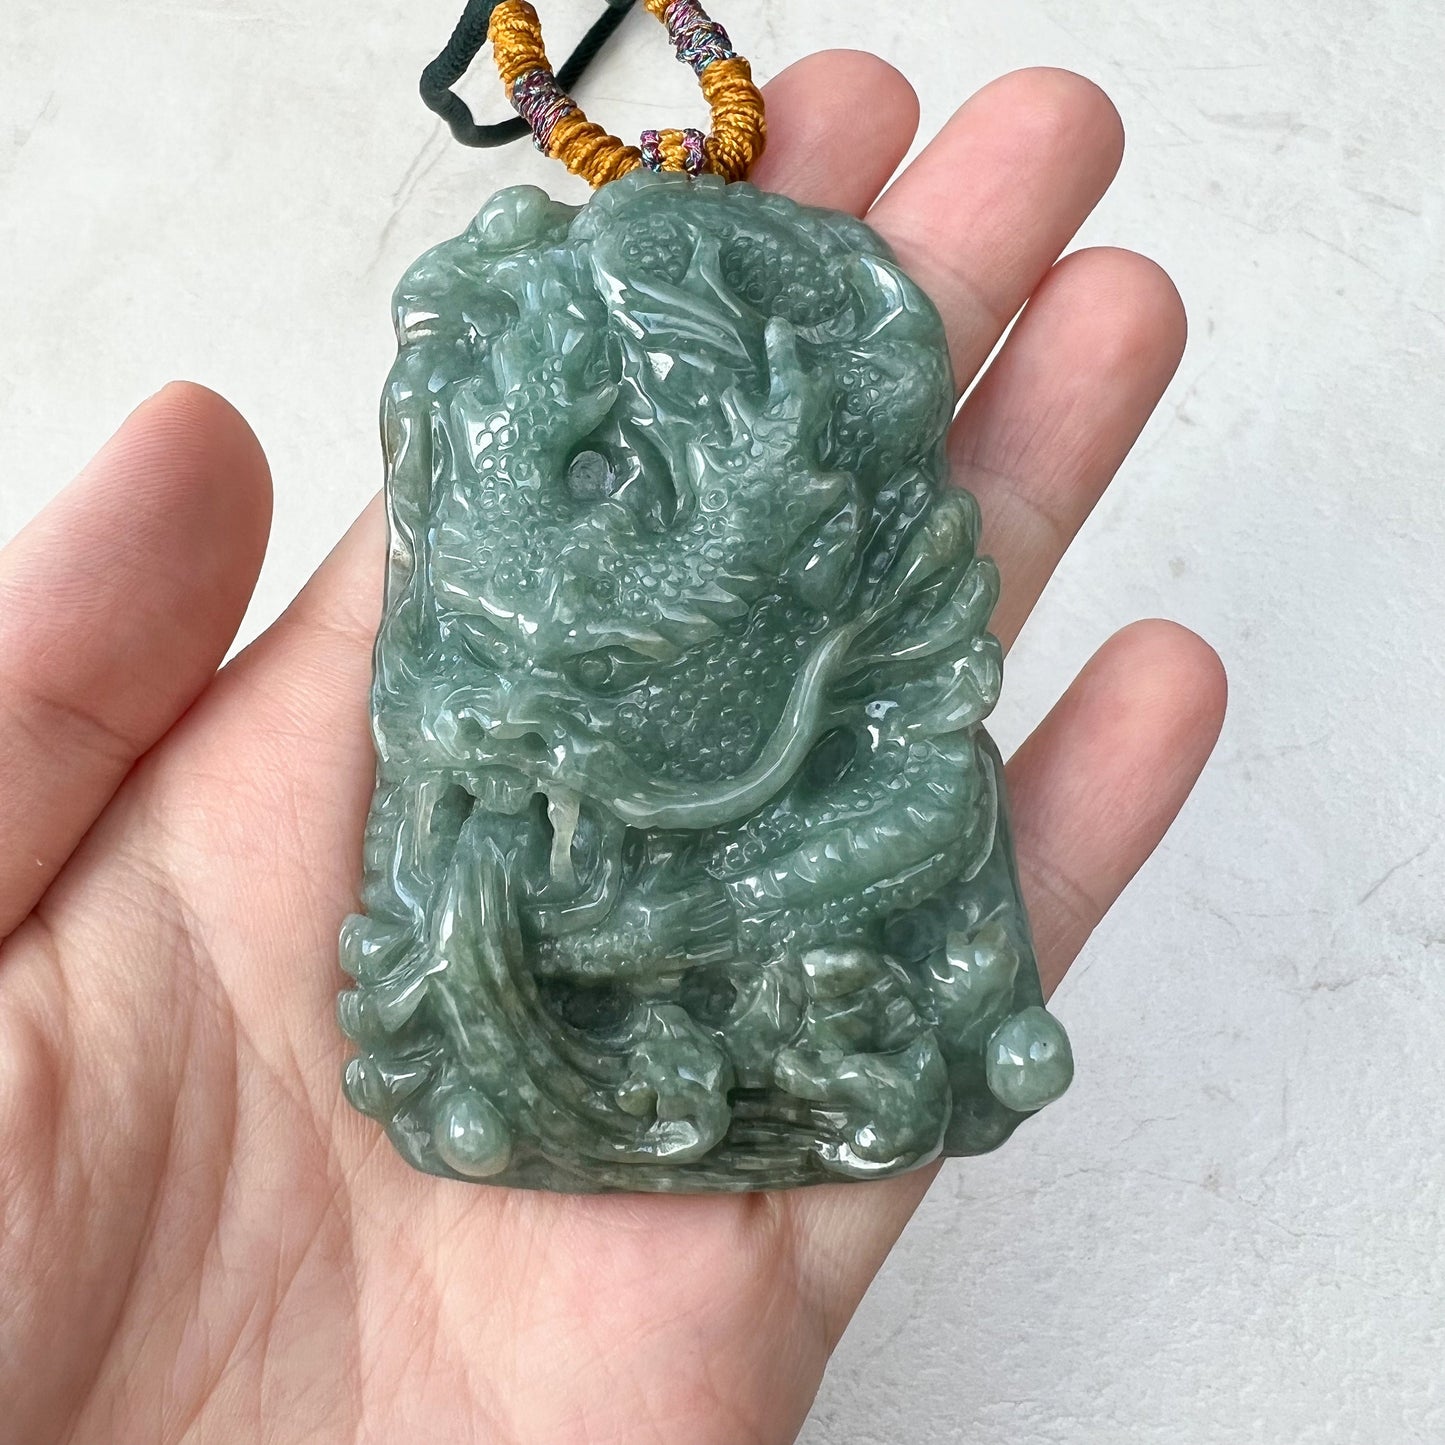 Large Dragon, Jadeite Jade, Green, Chinese Zodiac Hand Carved Pendant Necklace, YJ-0921-0061224 - AriaDesignCollection